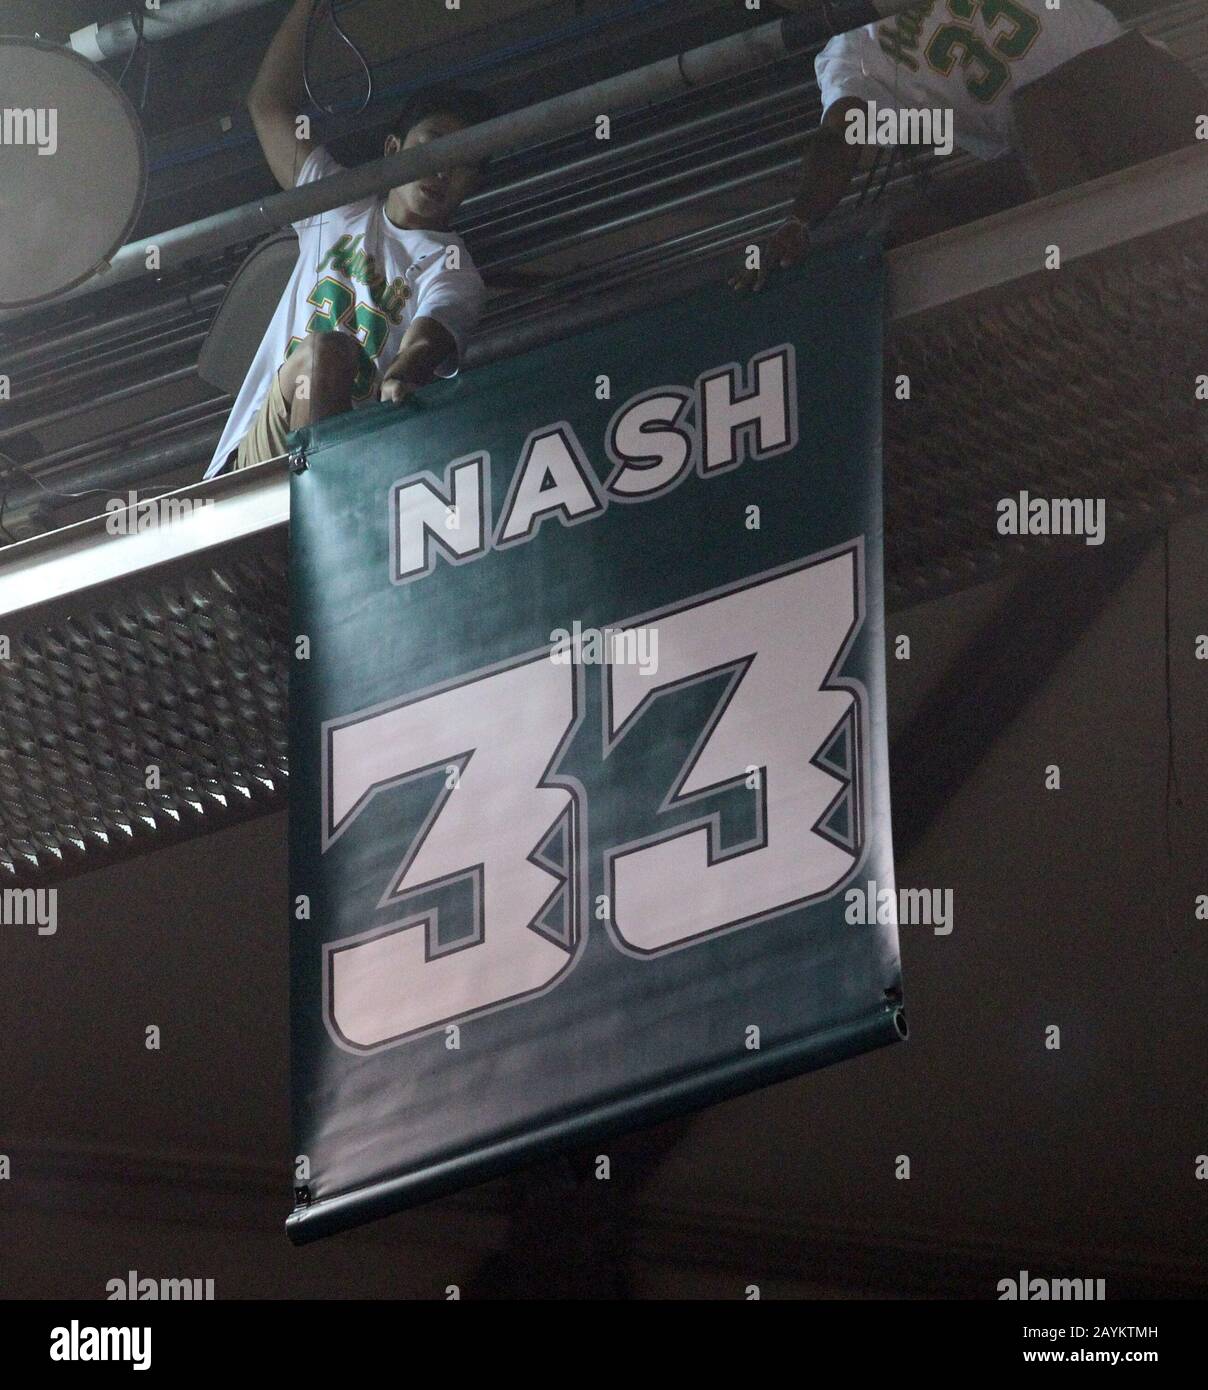 February 15, 2020 - University of Hawaii legend Bob Nash was honored at halftime, having his number 33 jersey retired during a game between the UC Irvine Anteaters and the Hawaii Rainbow Warriors at the Stan Sheriff Center in Honolulu, HI - Michael Sullivan/CSM Stock Photo